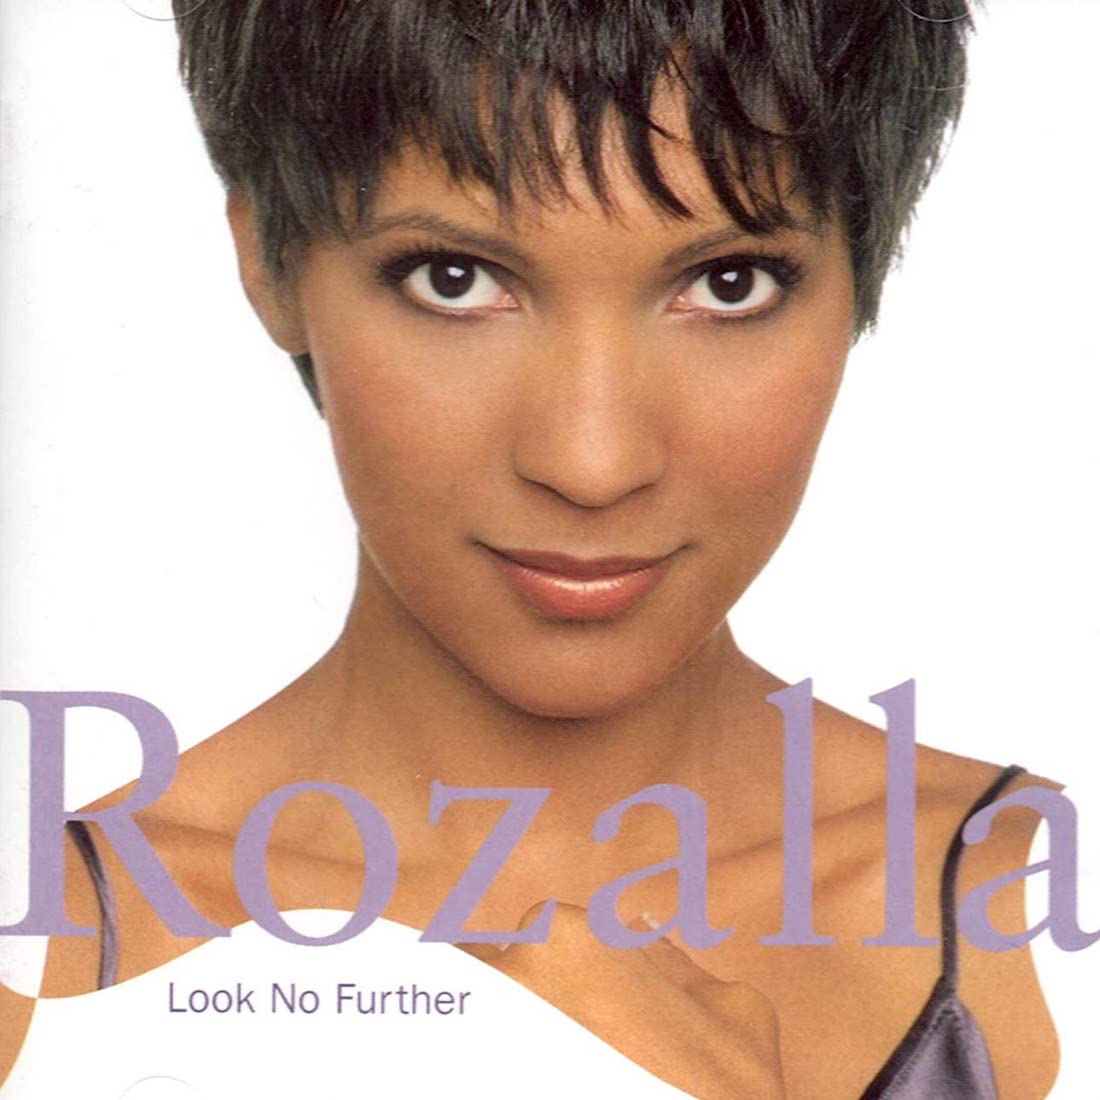 90s pop legend Rozalla dramatic transformation 31 years after smash hit Everybody’s Free (To Feel Good)